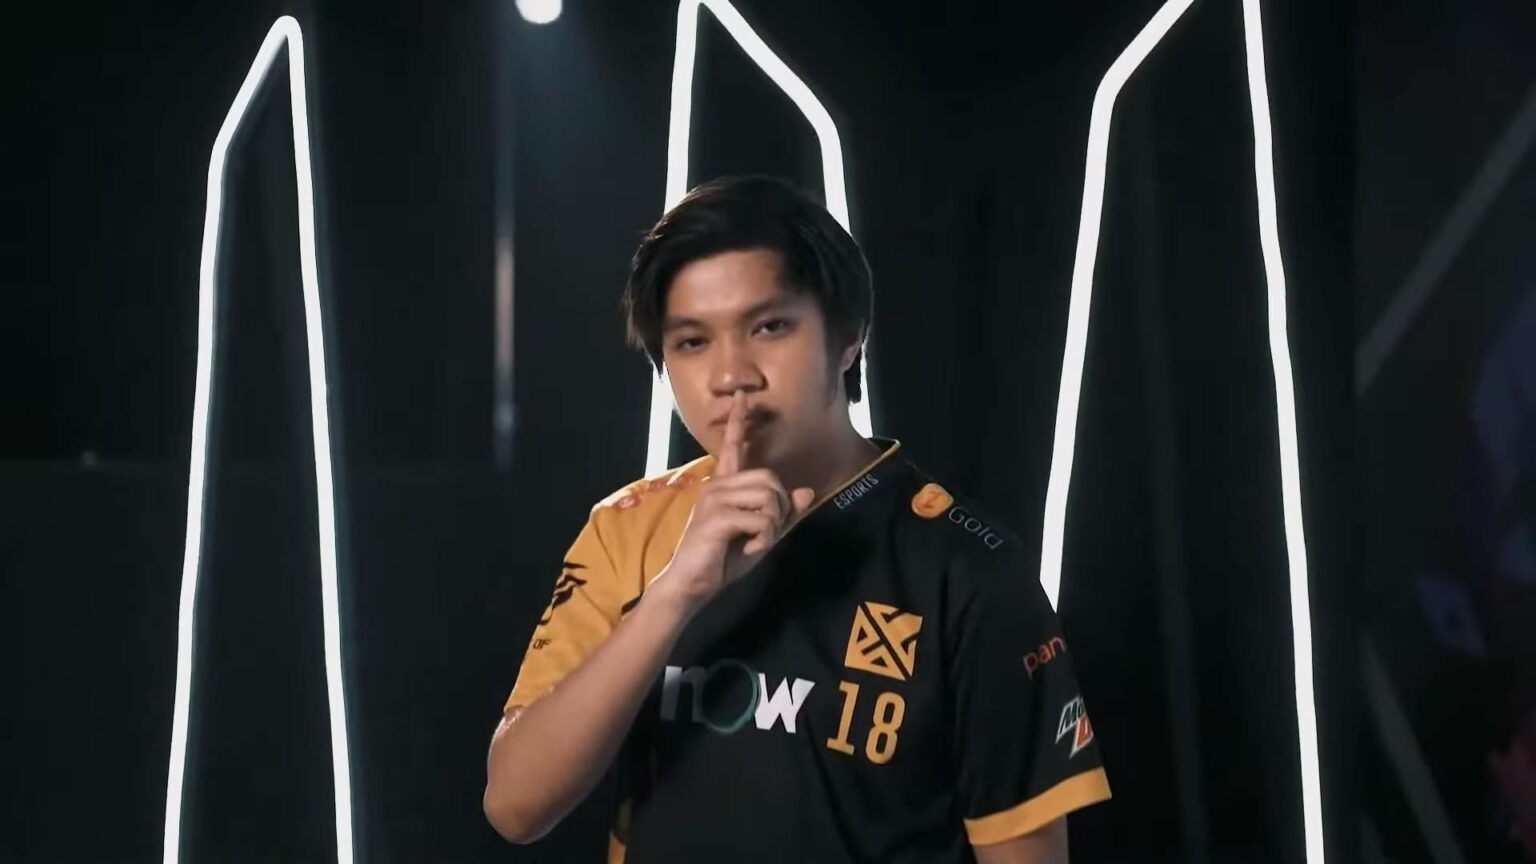 Win over NXPE a much-needed reprieve for down Bren, says Pheww - News -  Mobile Legends: Bang Bang Professional League Philippines